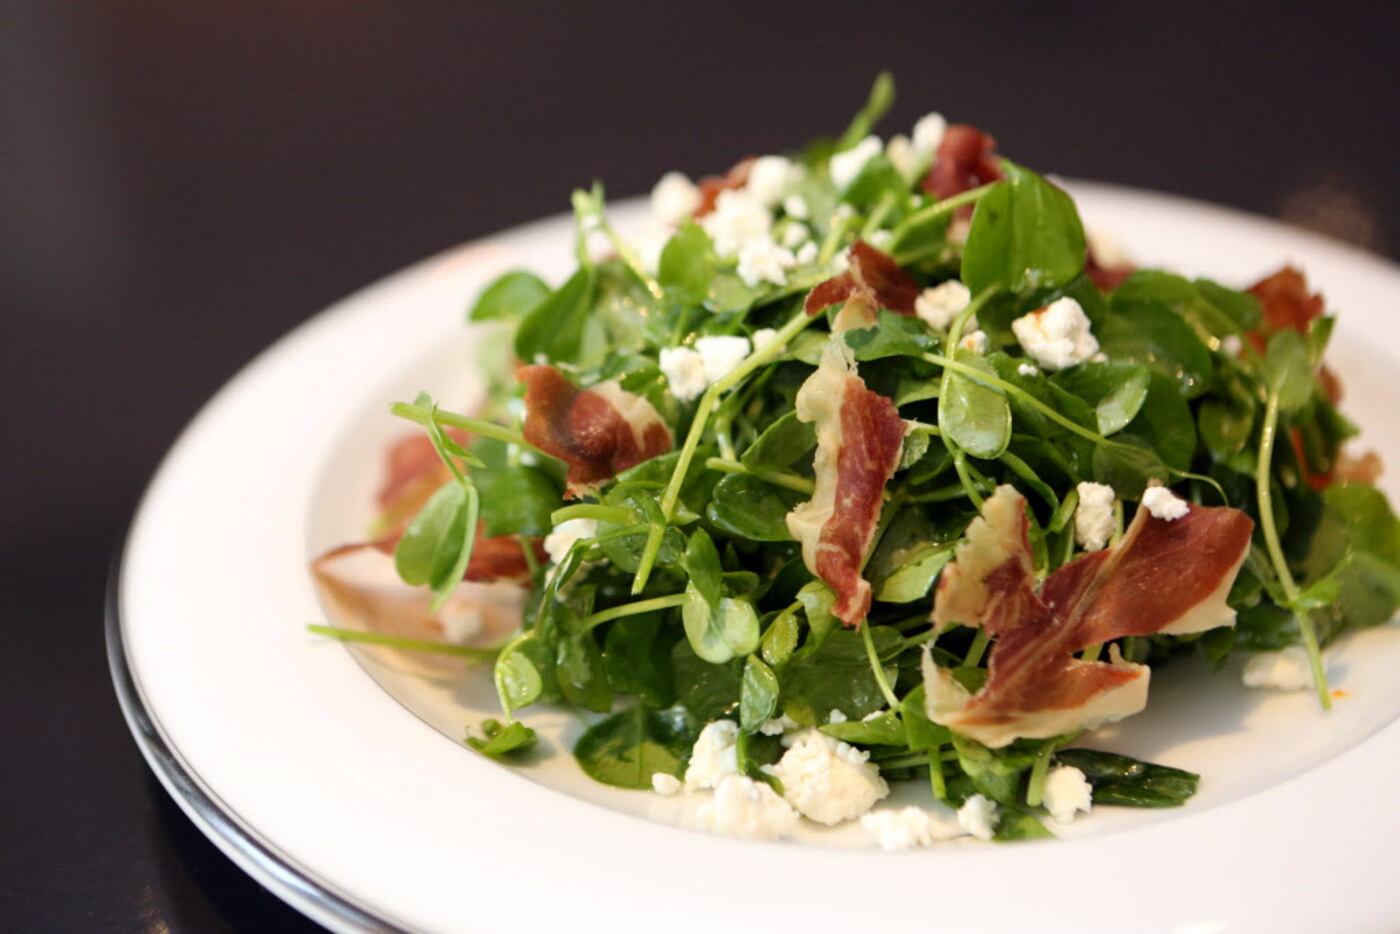 Pea shoot salad with crispy prosciutto and house-made ricotta at Cafe Momentum